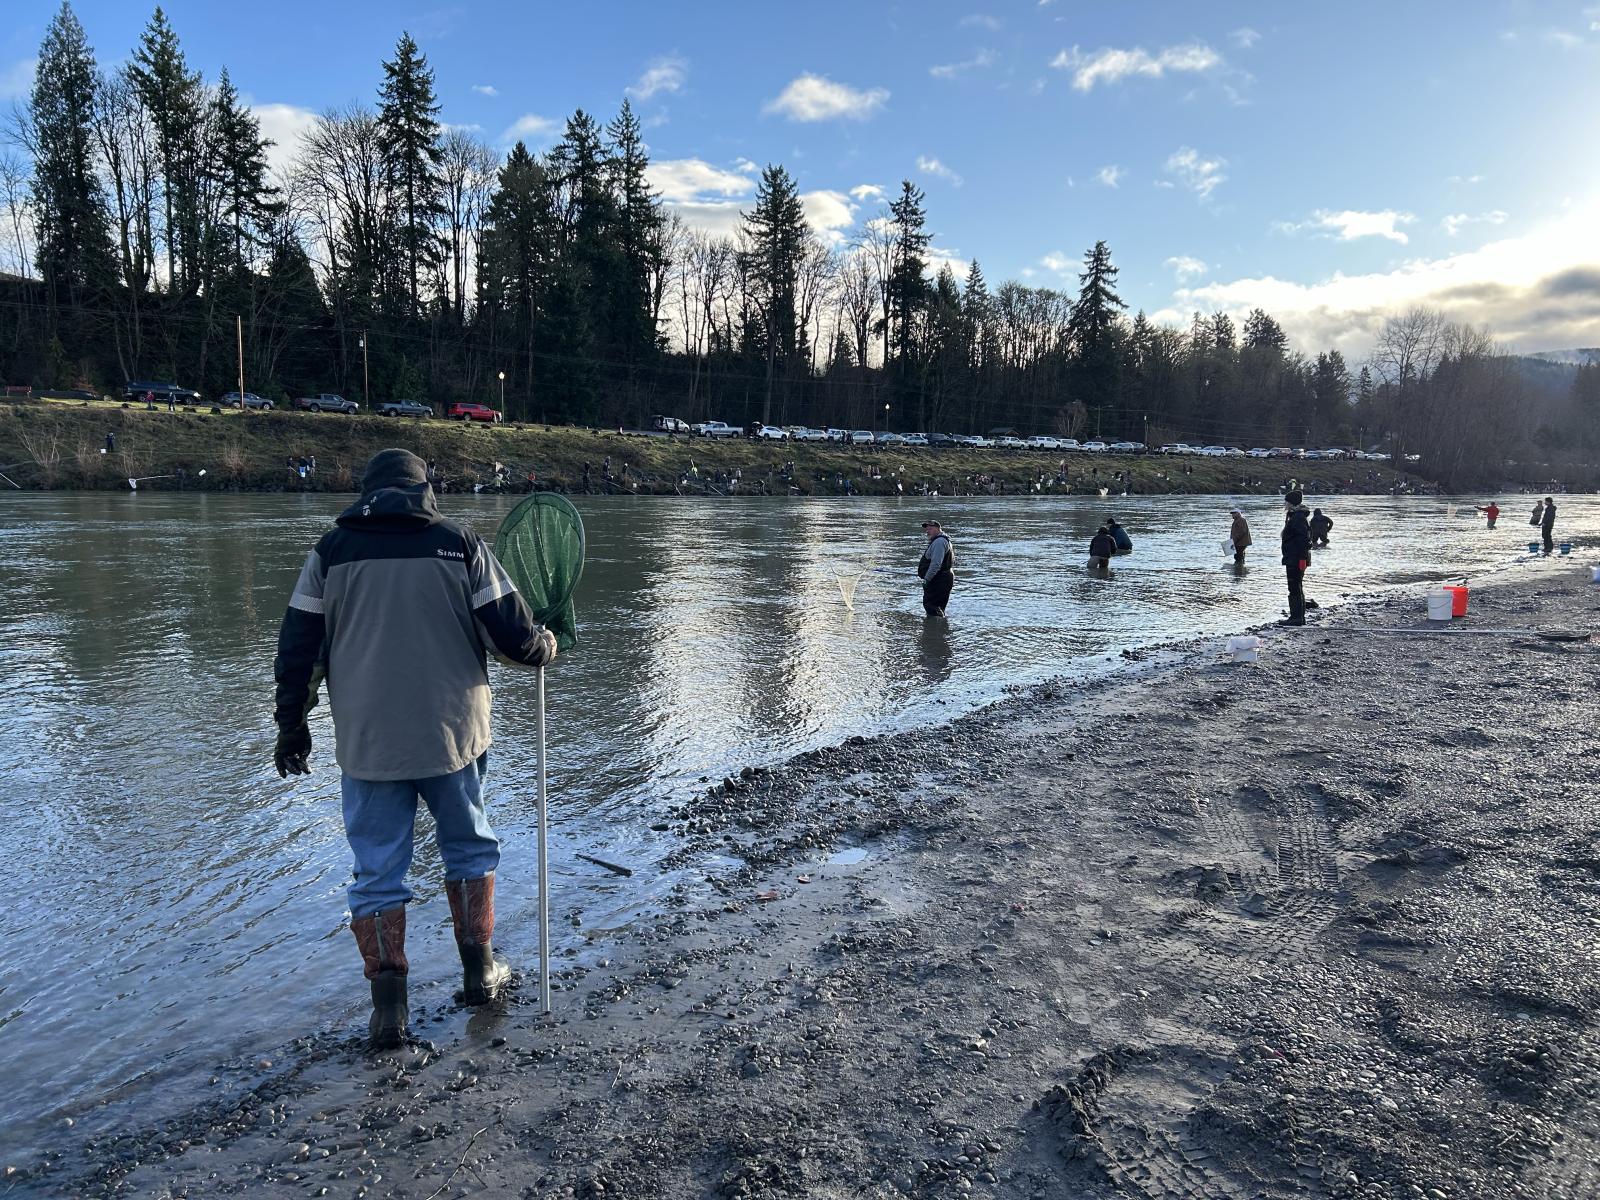 Additional one-day smelt fishery announced for Cowlitz River on